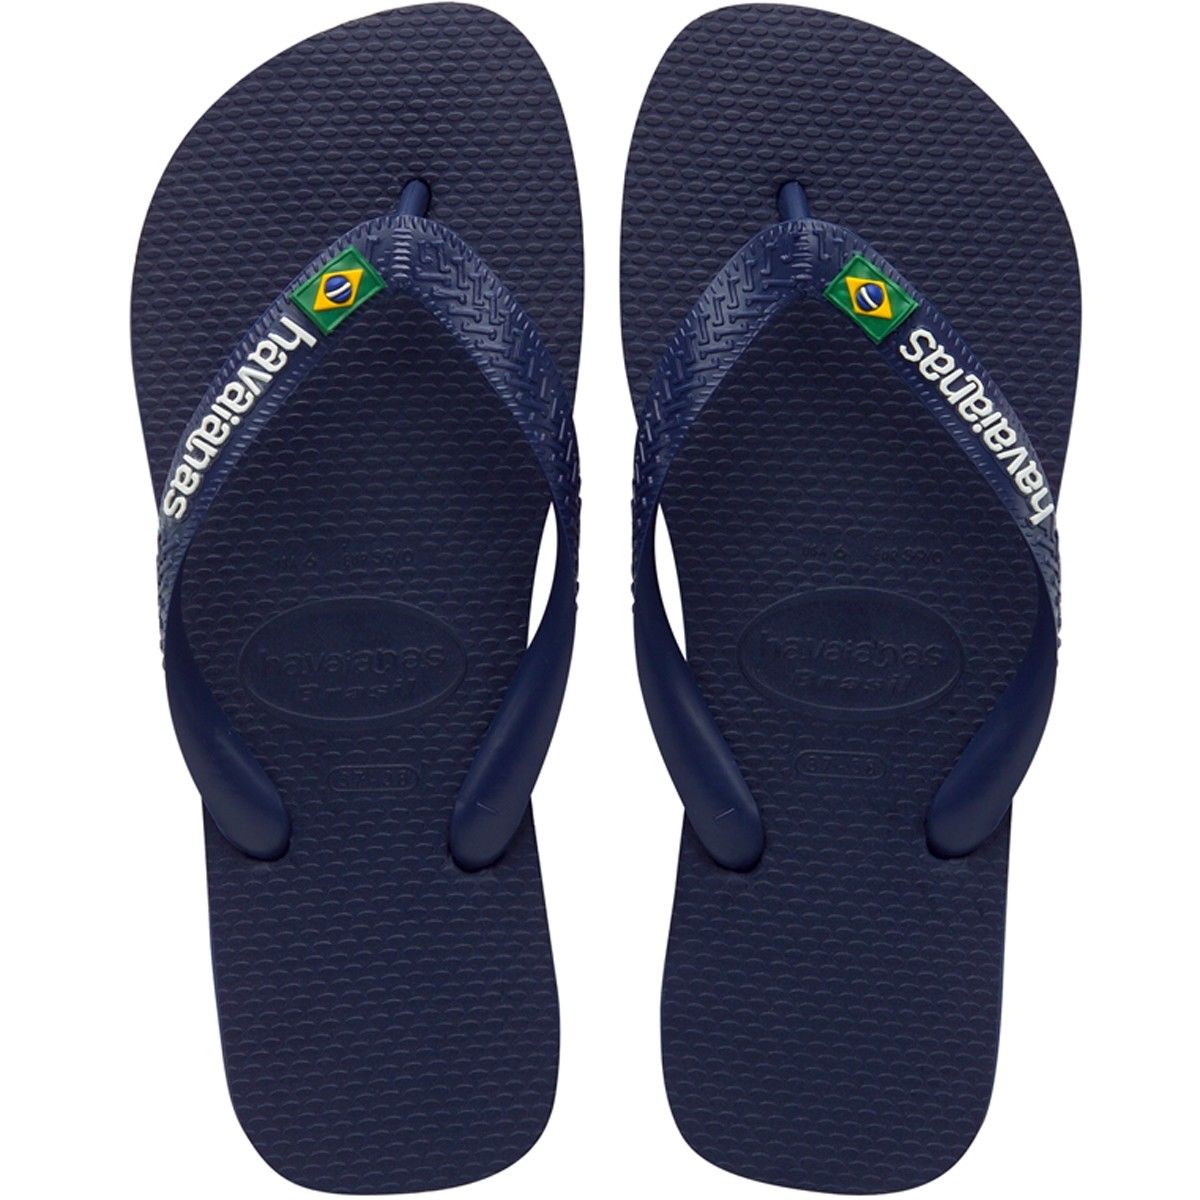 flip flops with support